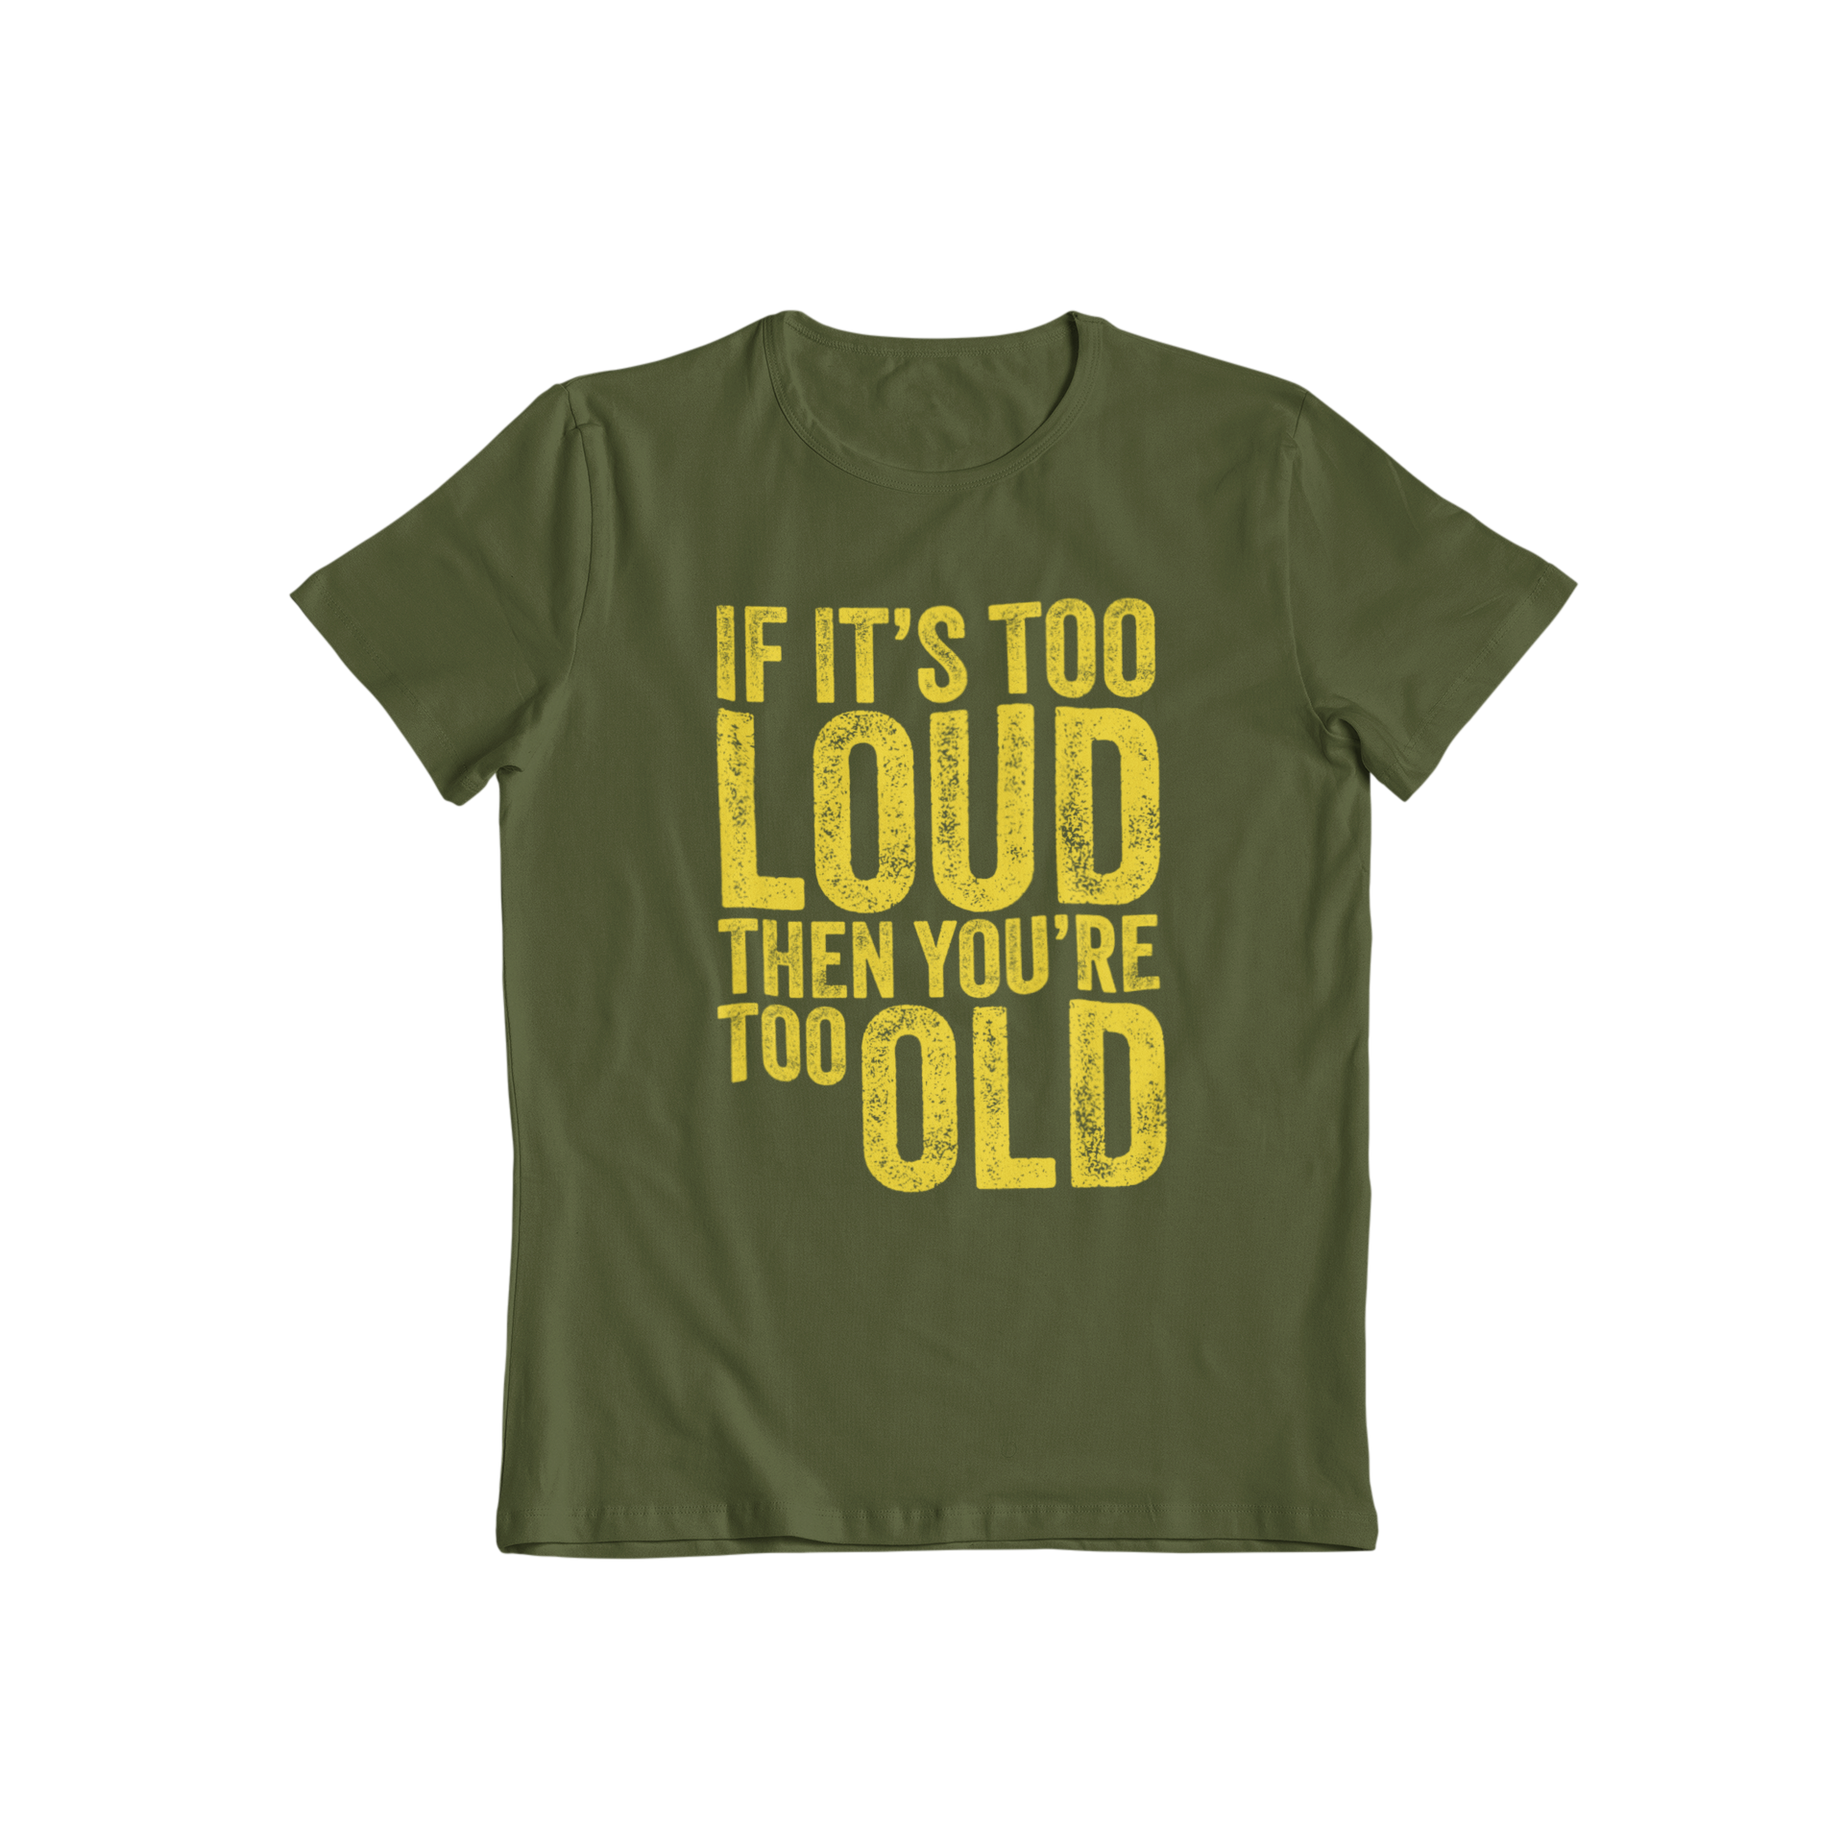 Embrace your inner youth with our Too Loud t-shirt. This classic slogan tee boldly states "if it's too loud then you're too old", perfect for any music lover or rebellious spirit. Show off your playful side (and maybe make a statement) with this quirky and fun shirt. (But seriously, wear earplugs).